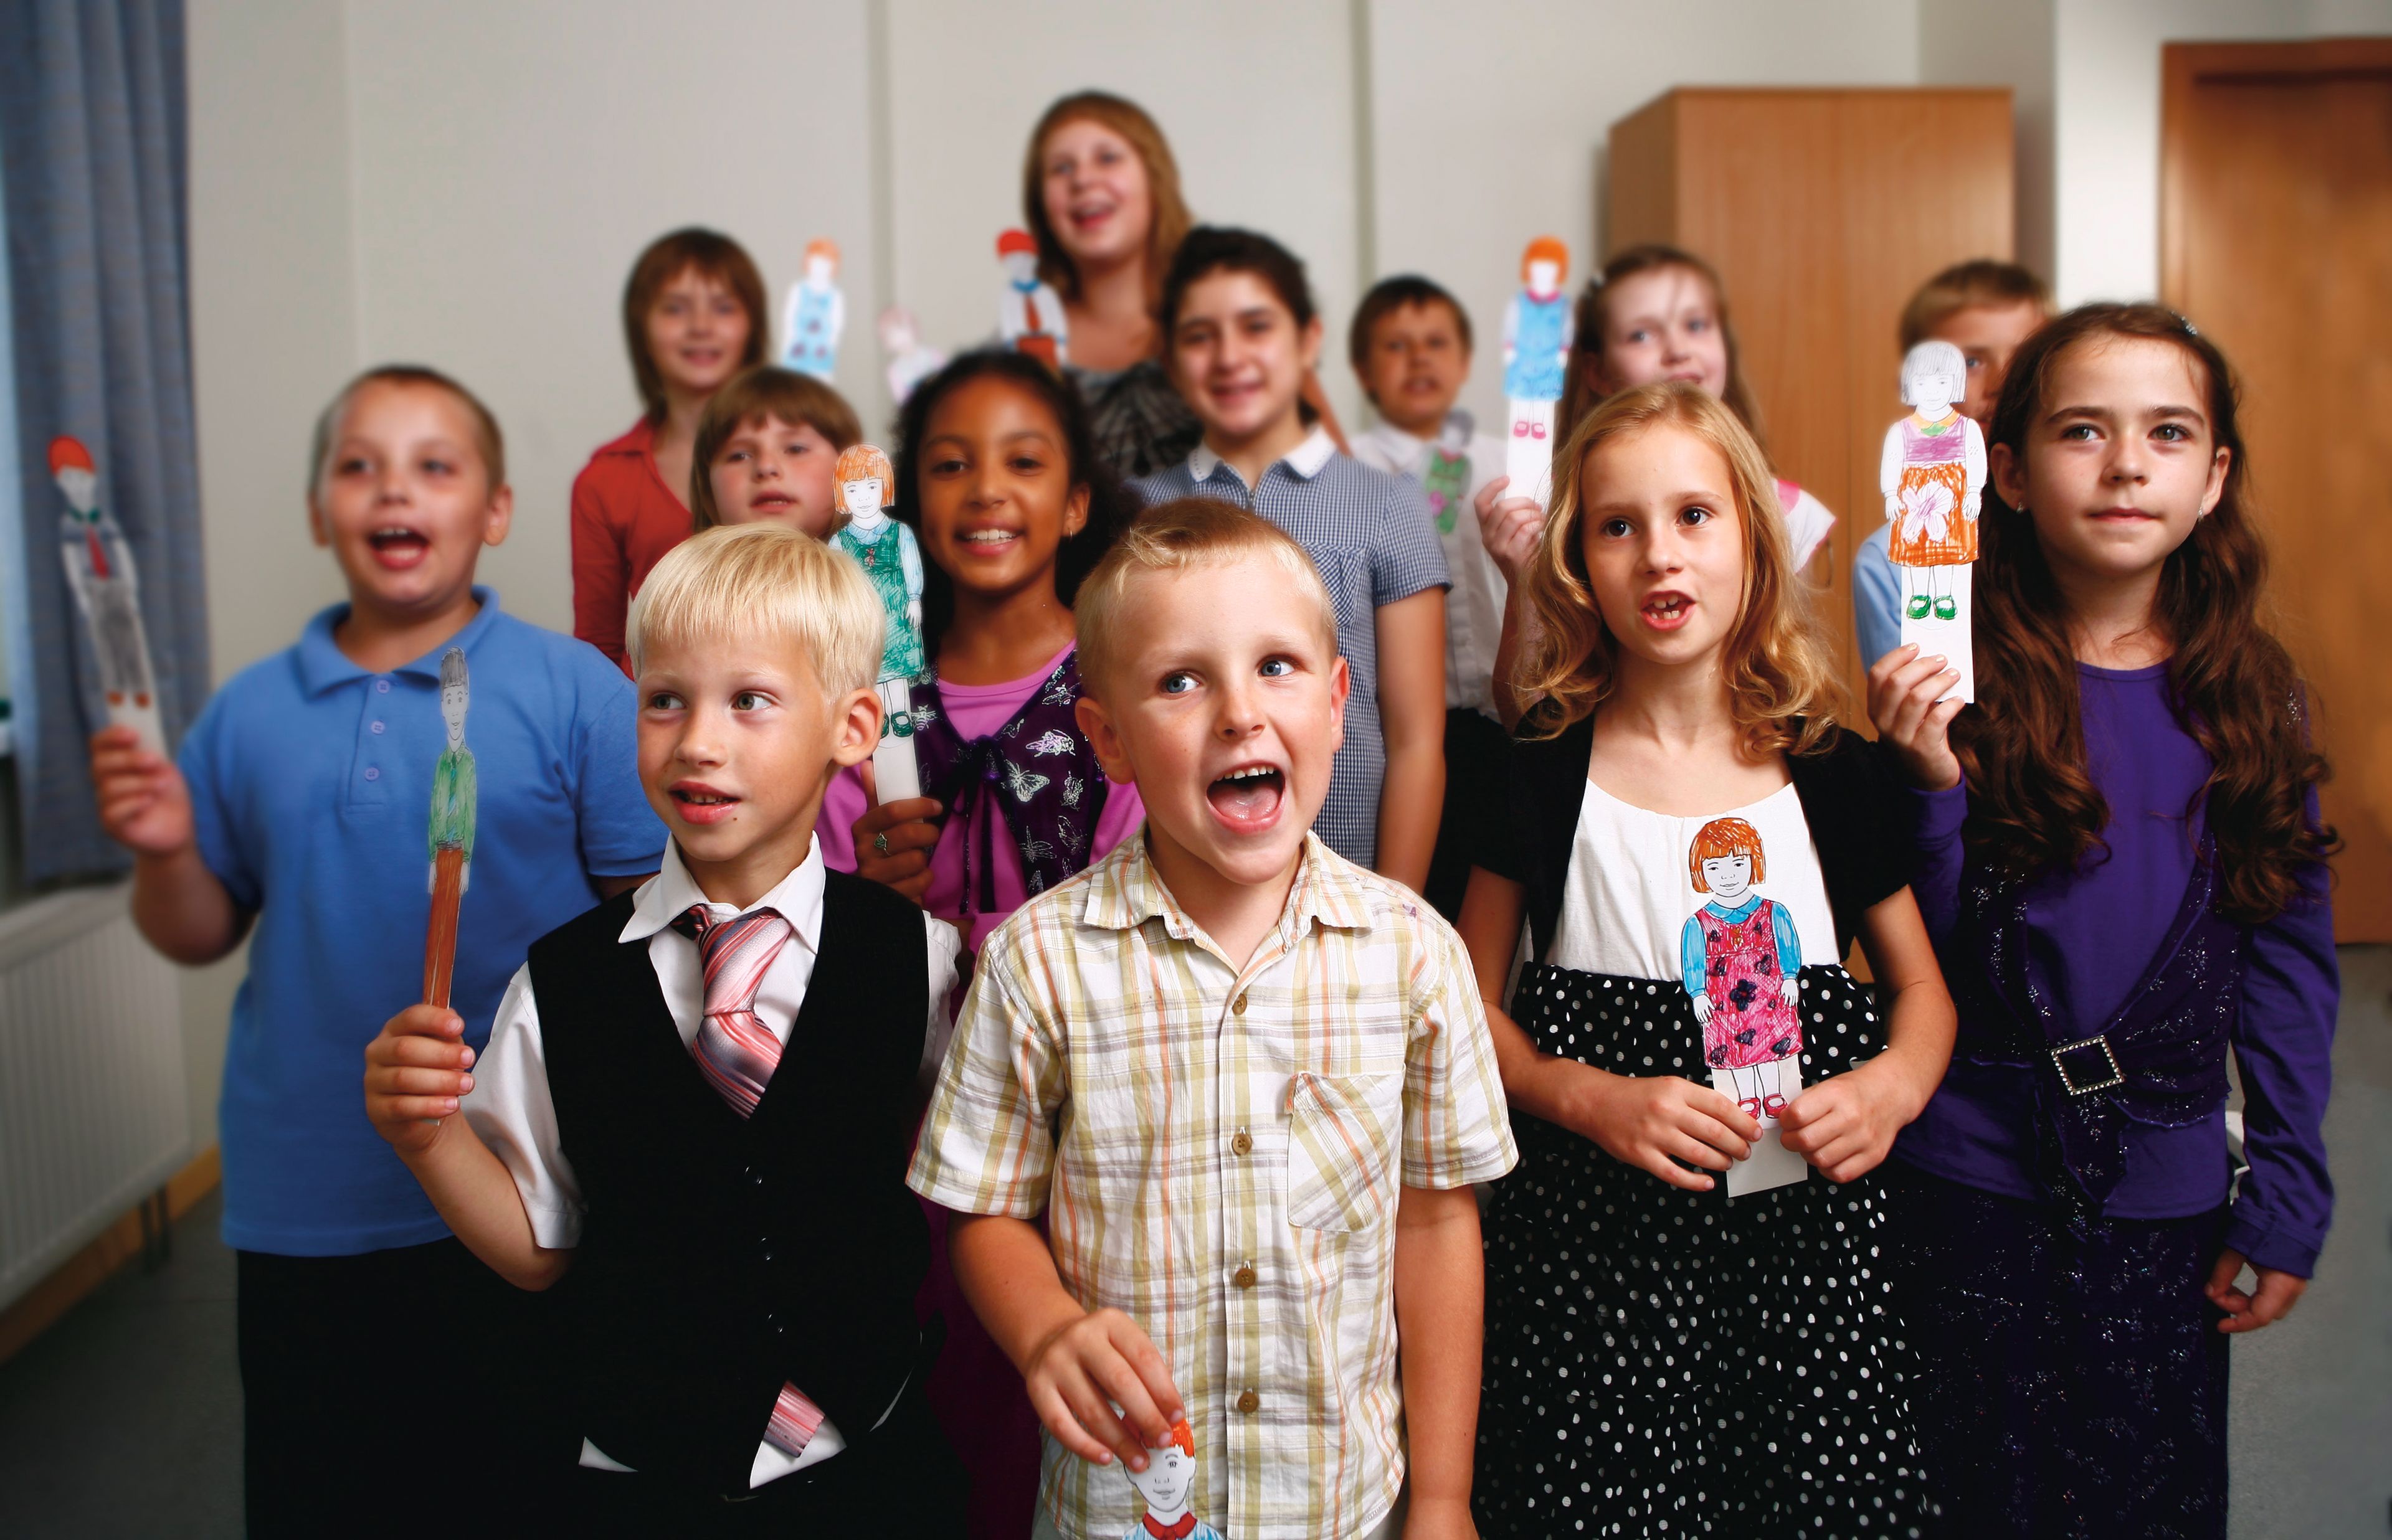 A Primary class sings together during singing time.